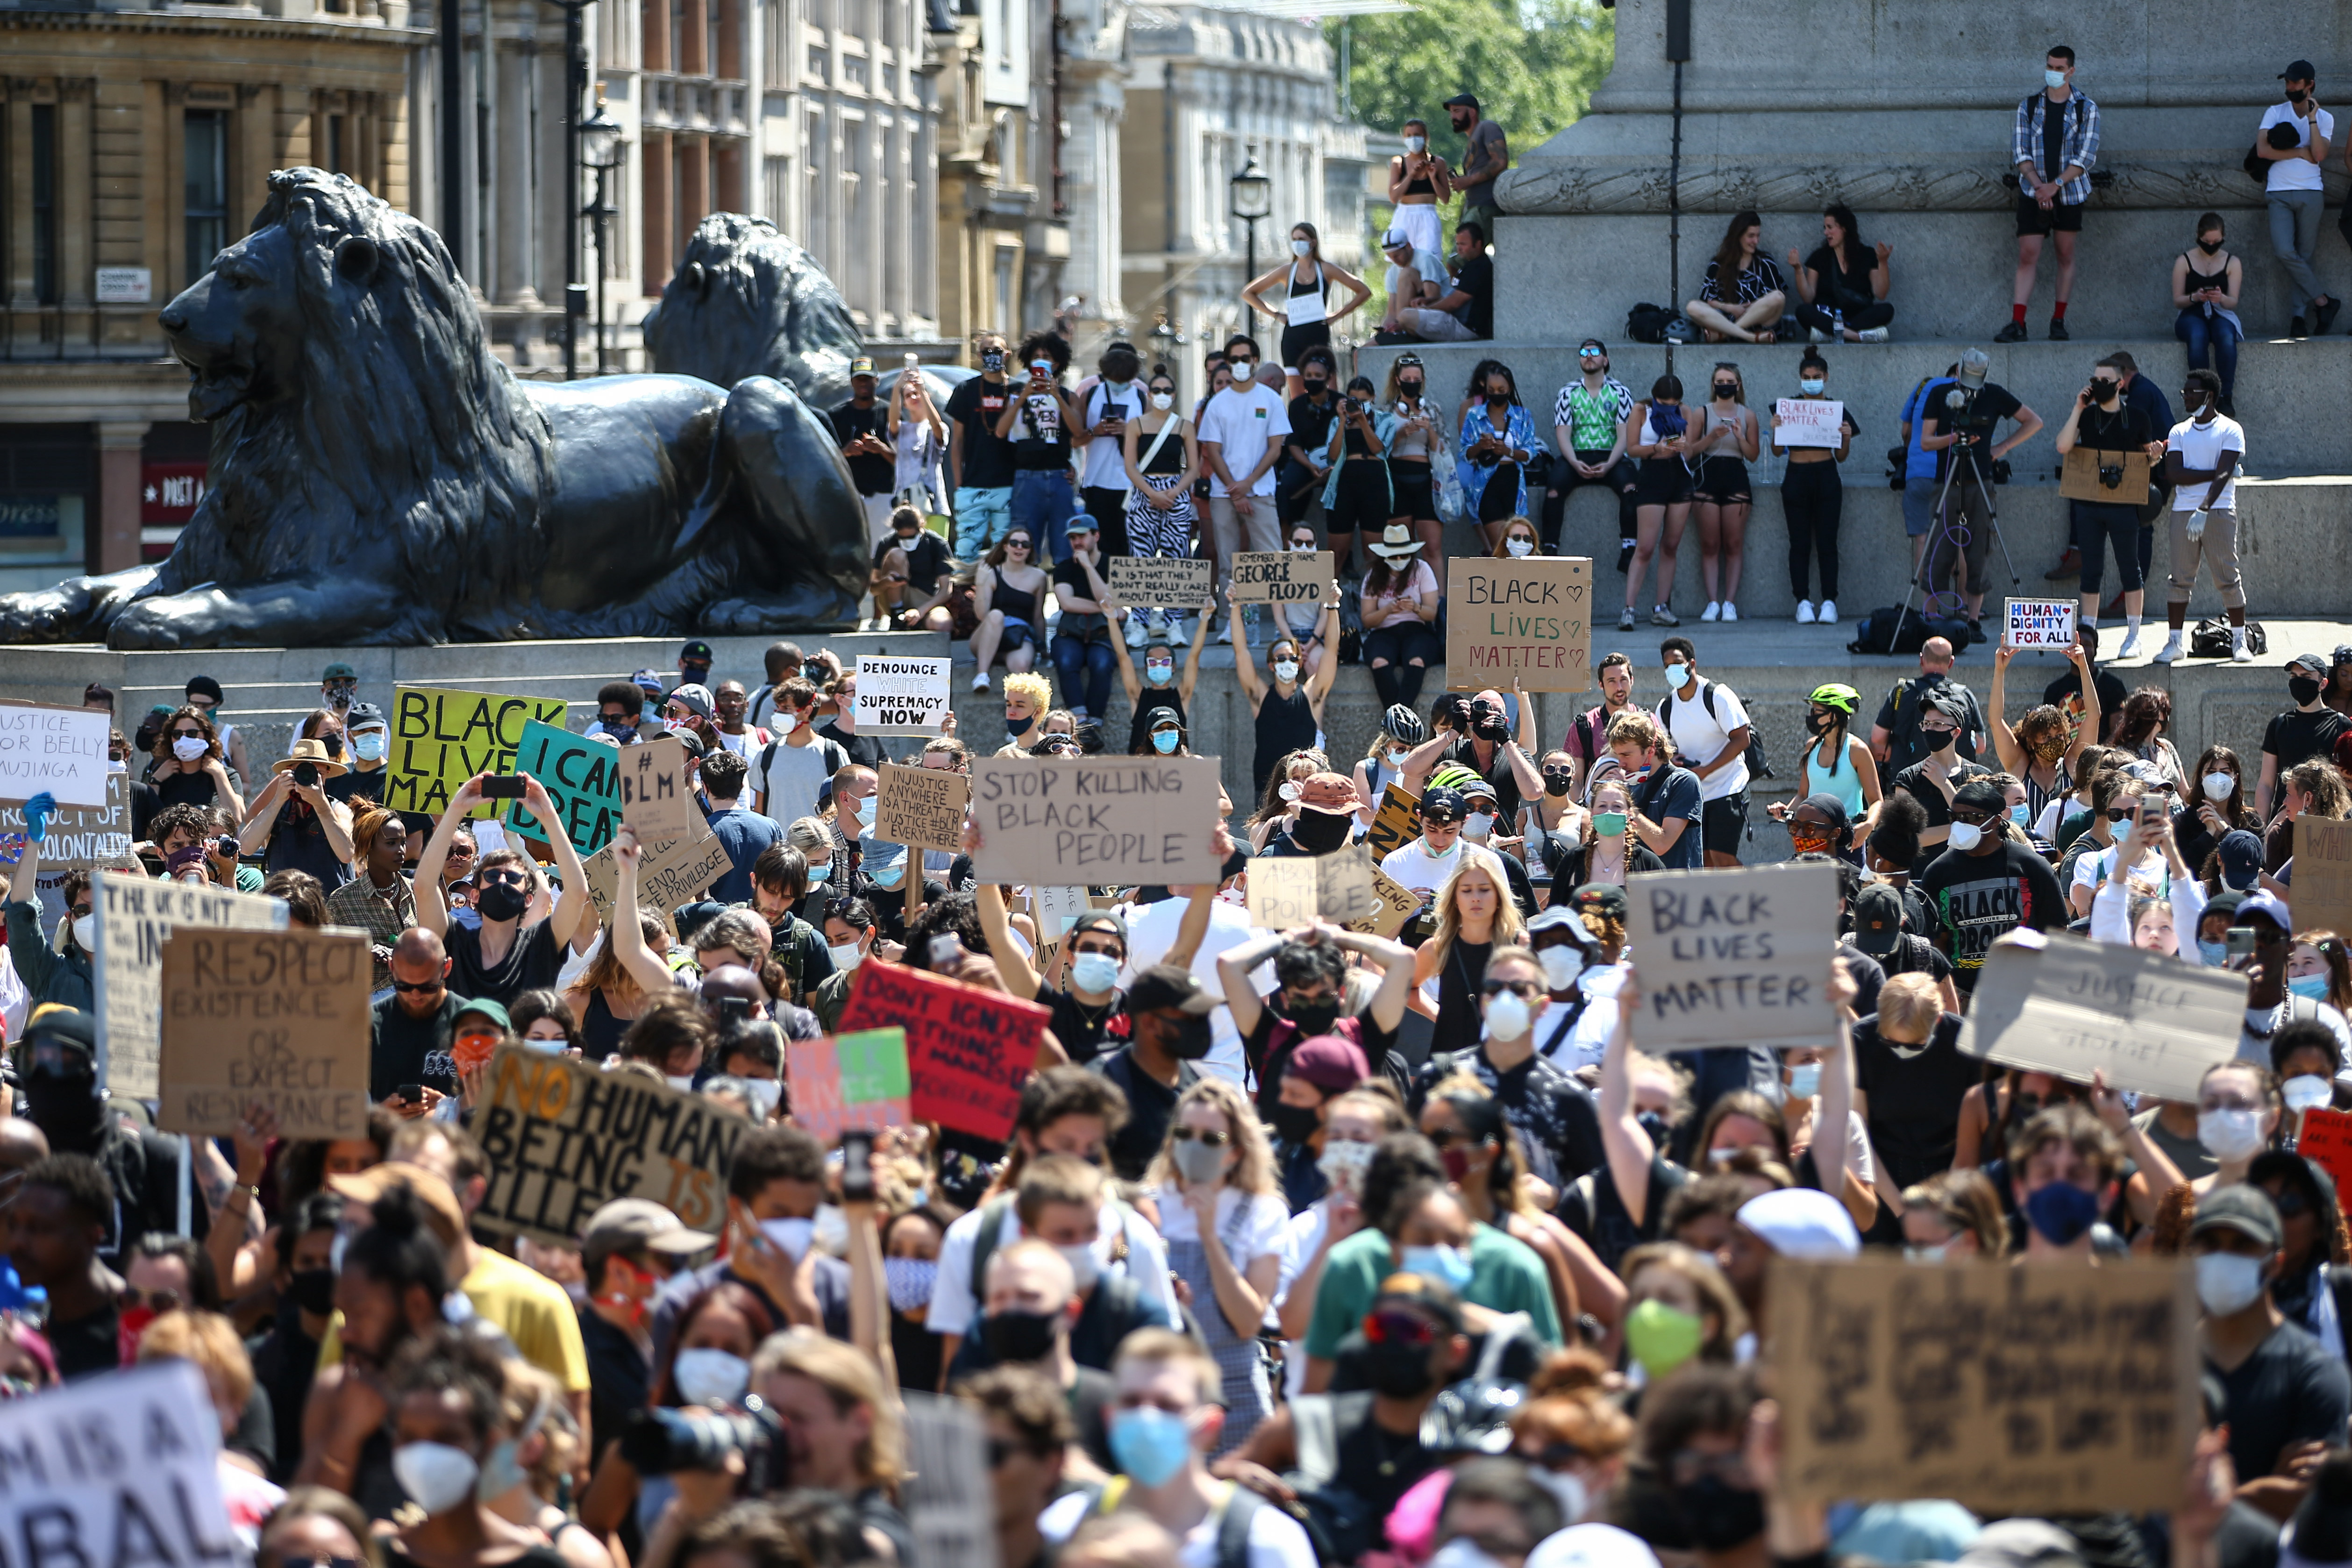 People hold placards as they join a spontaneous Black Lives Matter march at Trafalgar Square in London to protest the death of George Floyd on May 31.